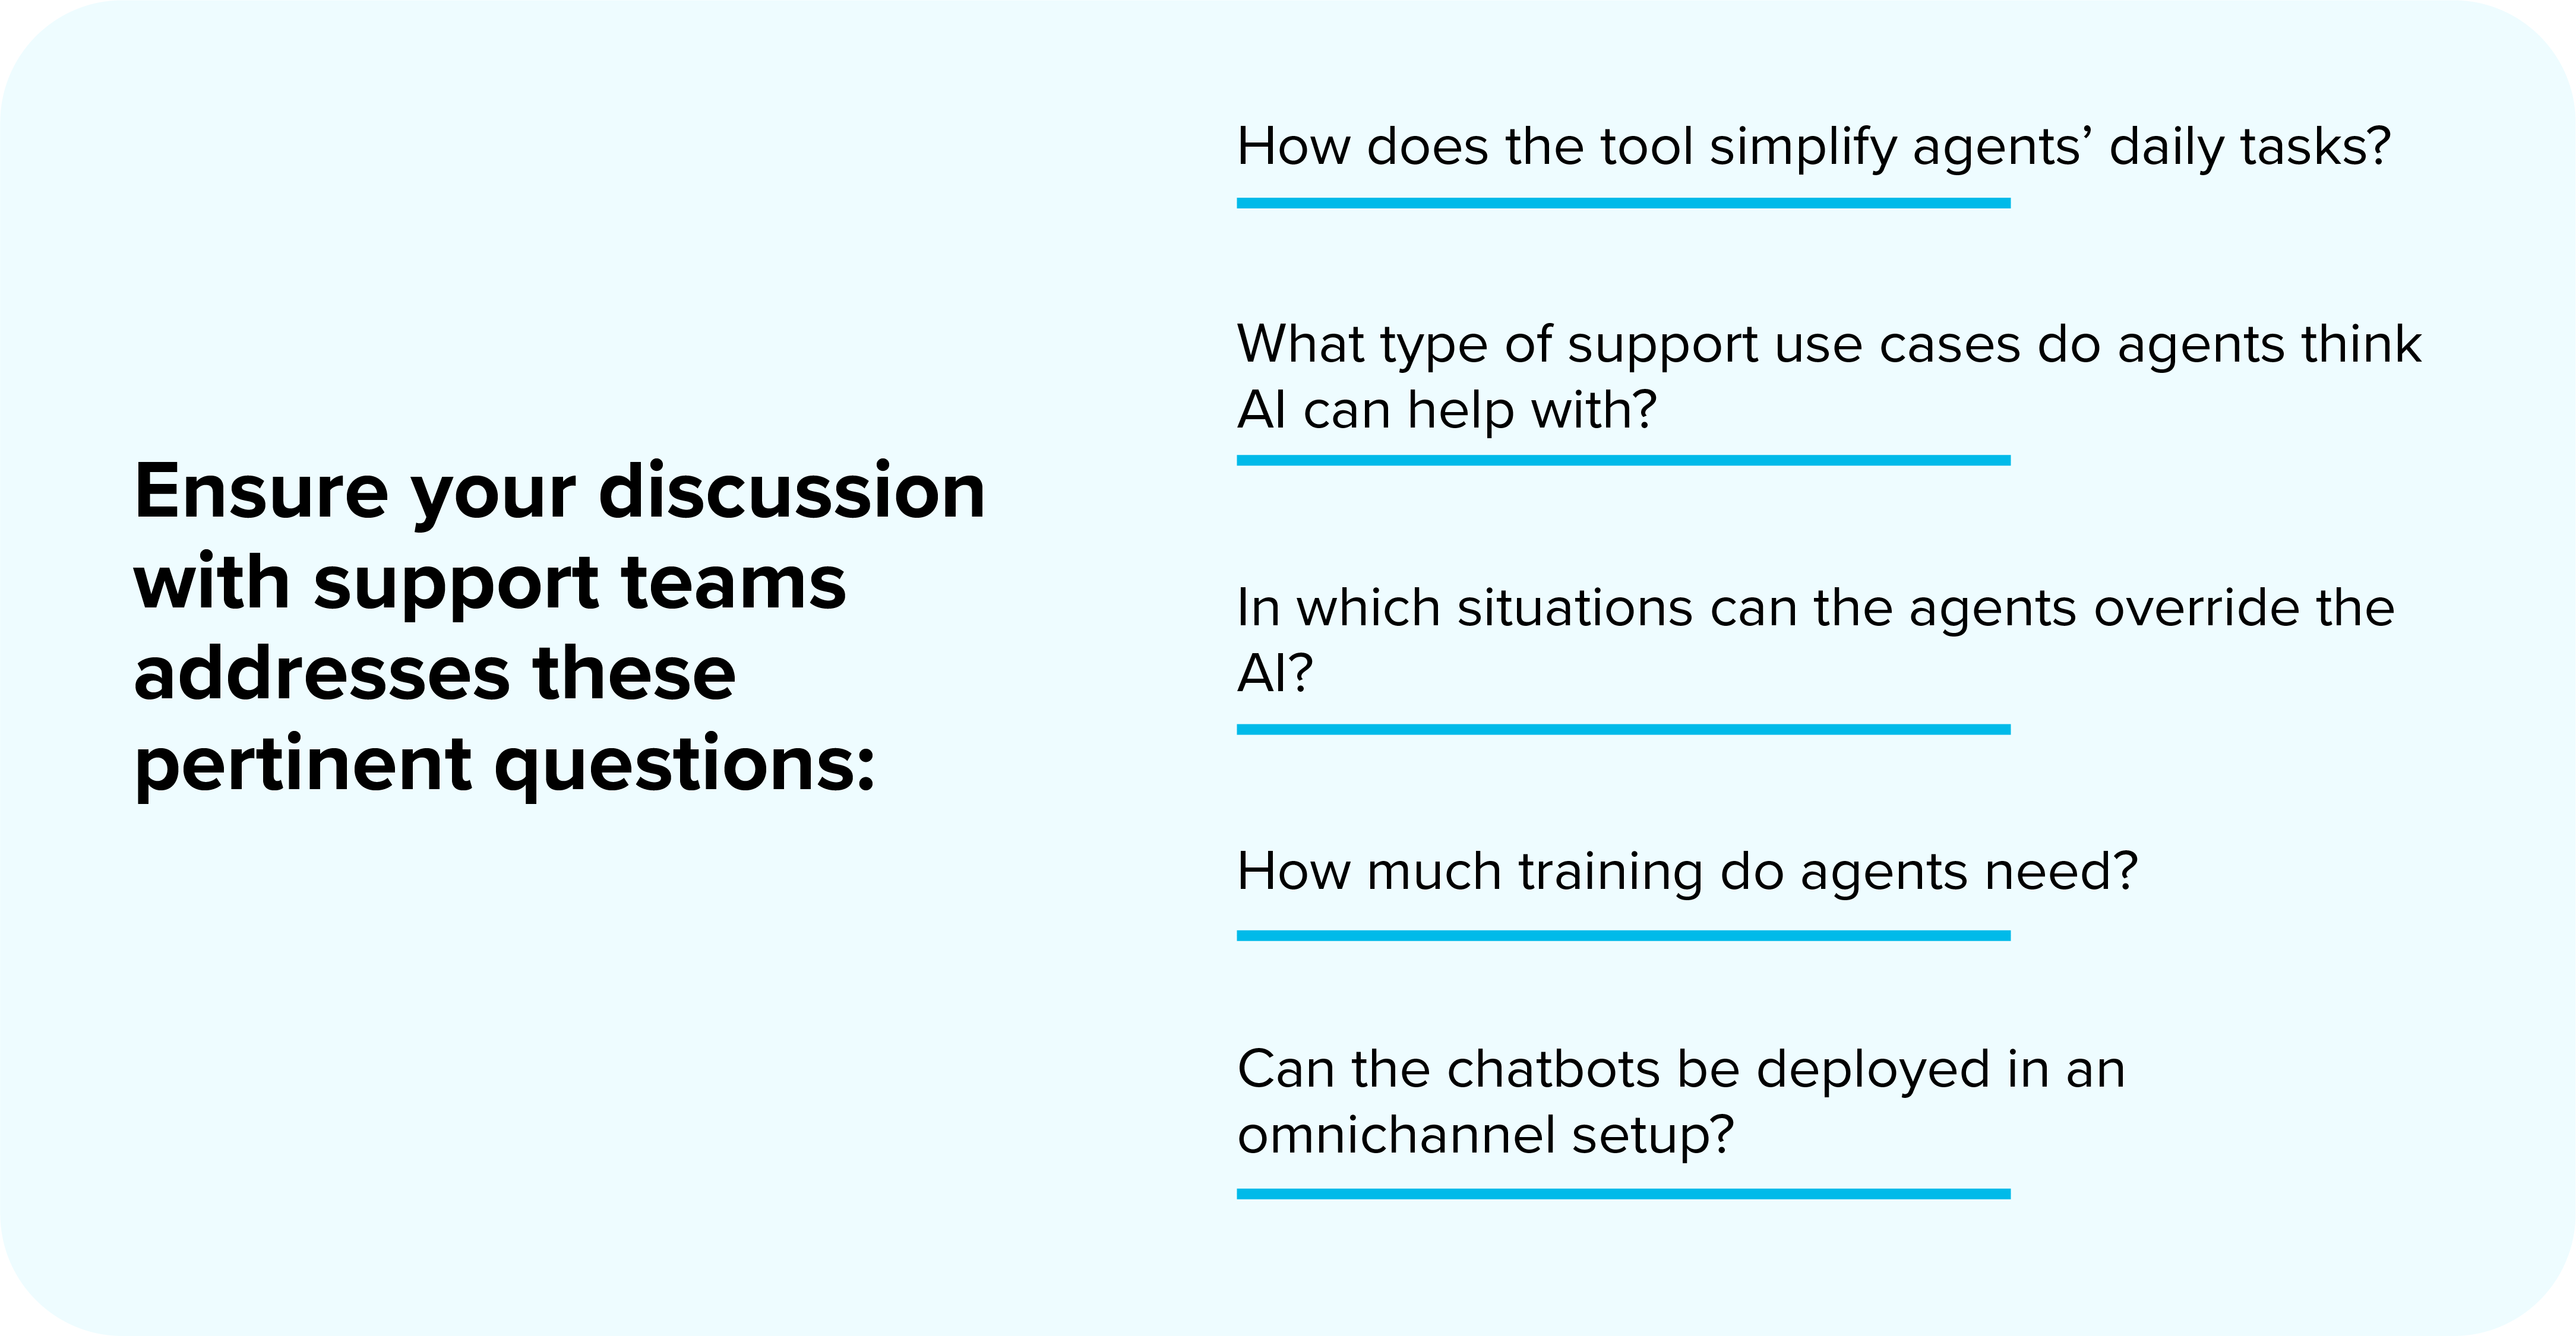 This image shows the 5 questions to ask your support team before deploying a chatbot for customer service.